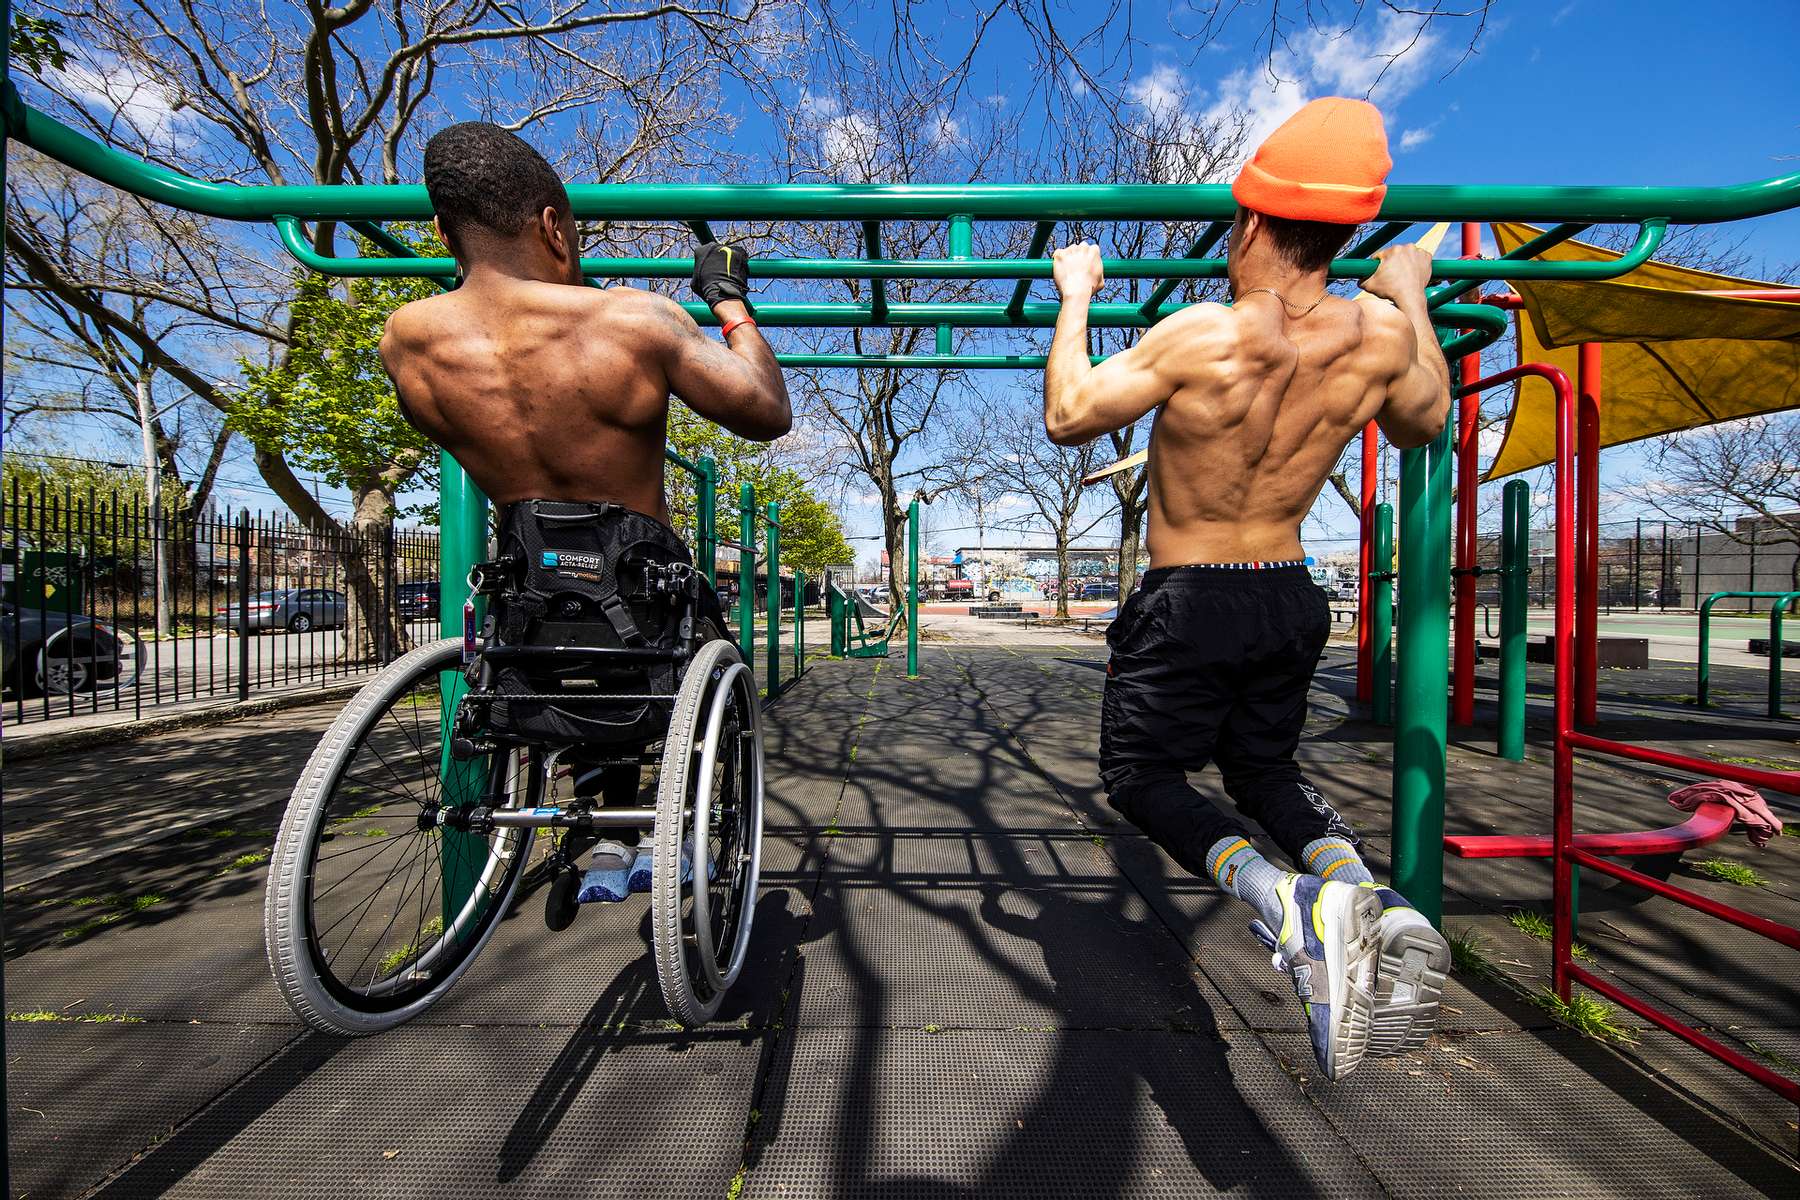 Team USA Para Powerlifter Garrison Redd does pull ups  in his wheelchair with fitness trainer Dennis Guerrero on the Monkey Bars in Robert E. Venable Park on April 13, 2021 in Brooklyn, New York. 